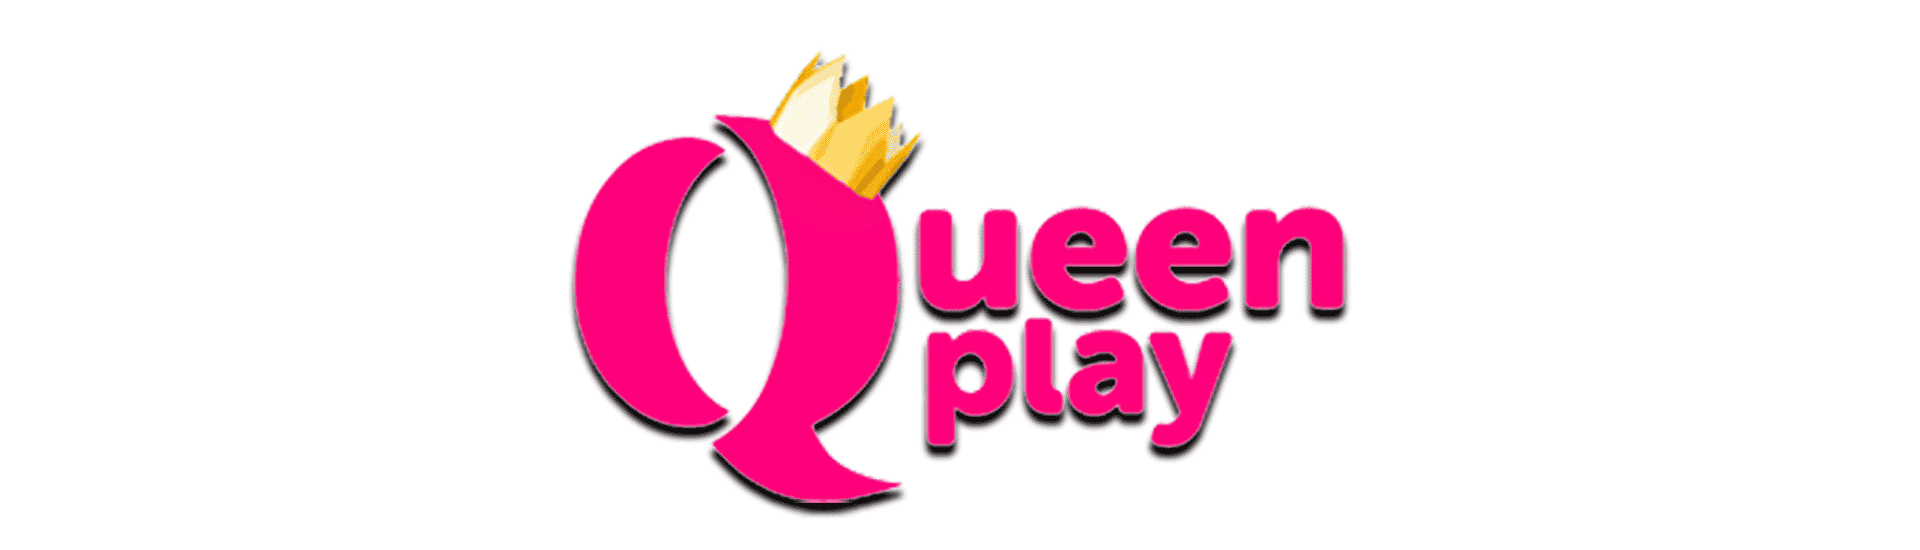 Queenplay Featured Image